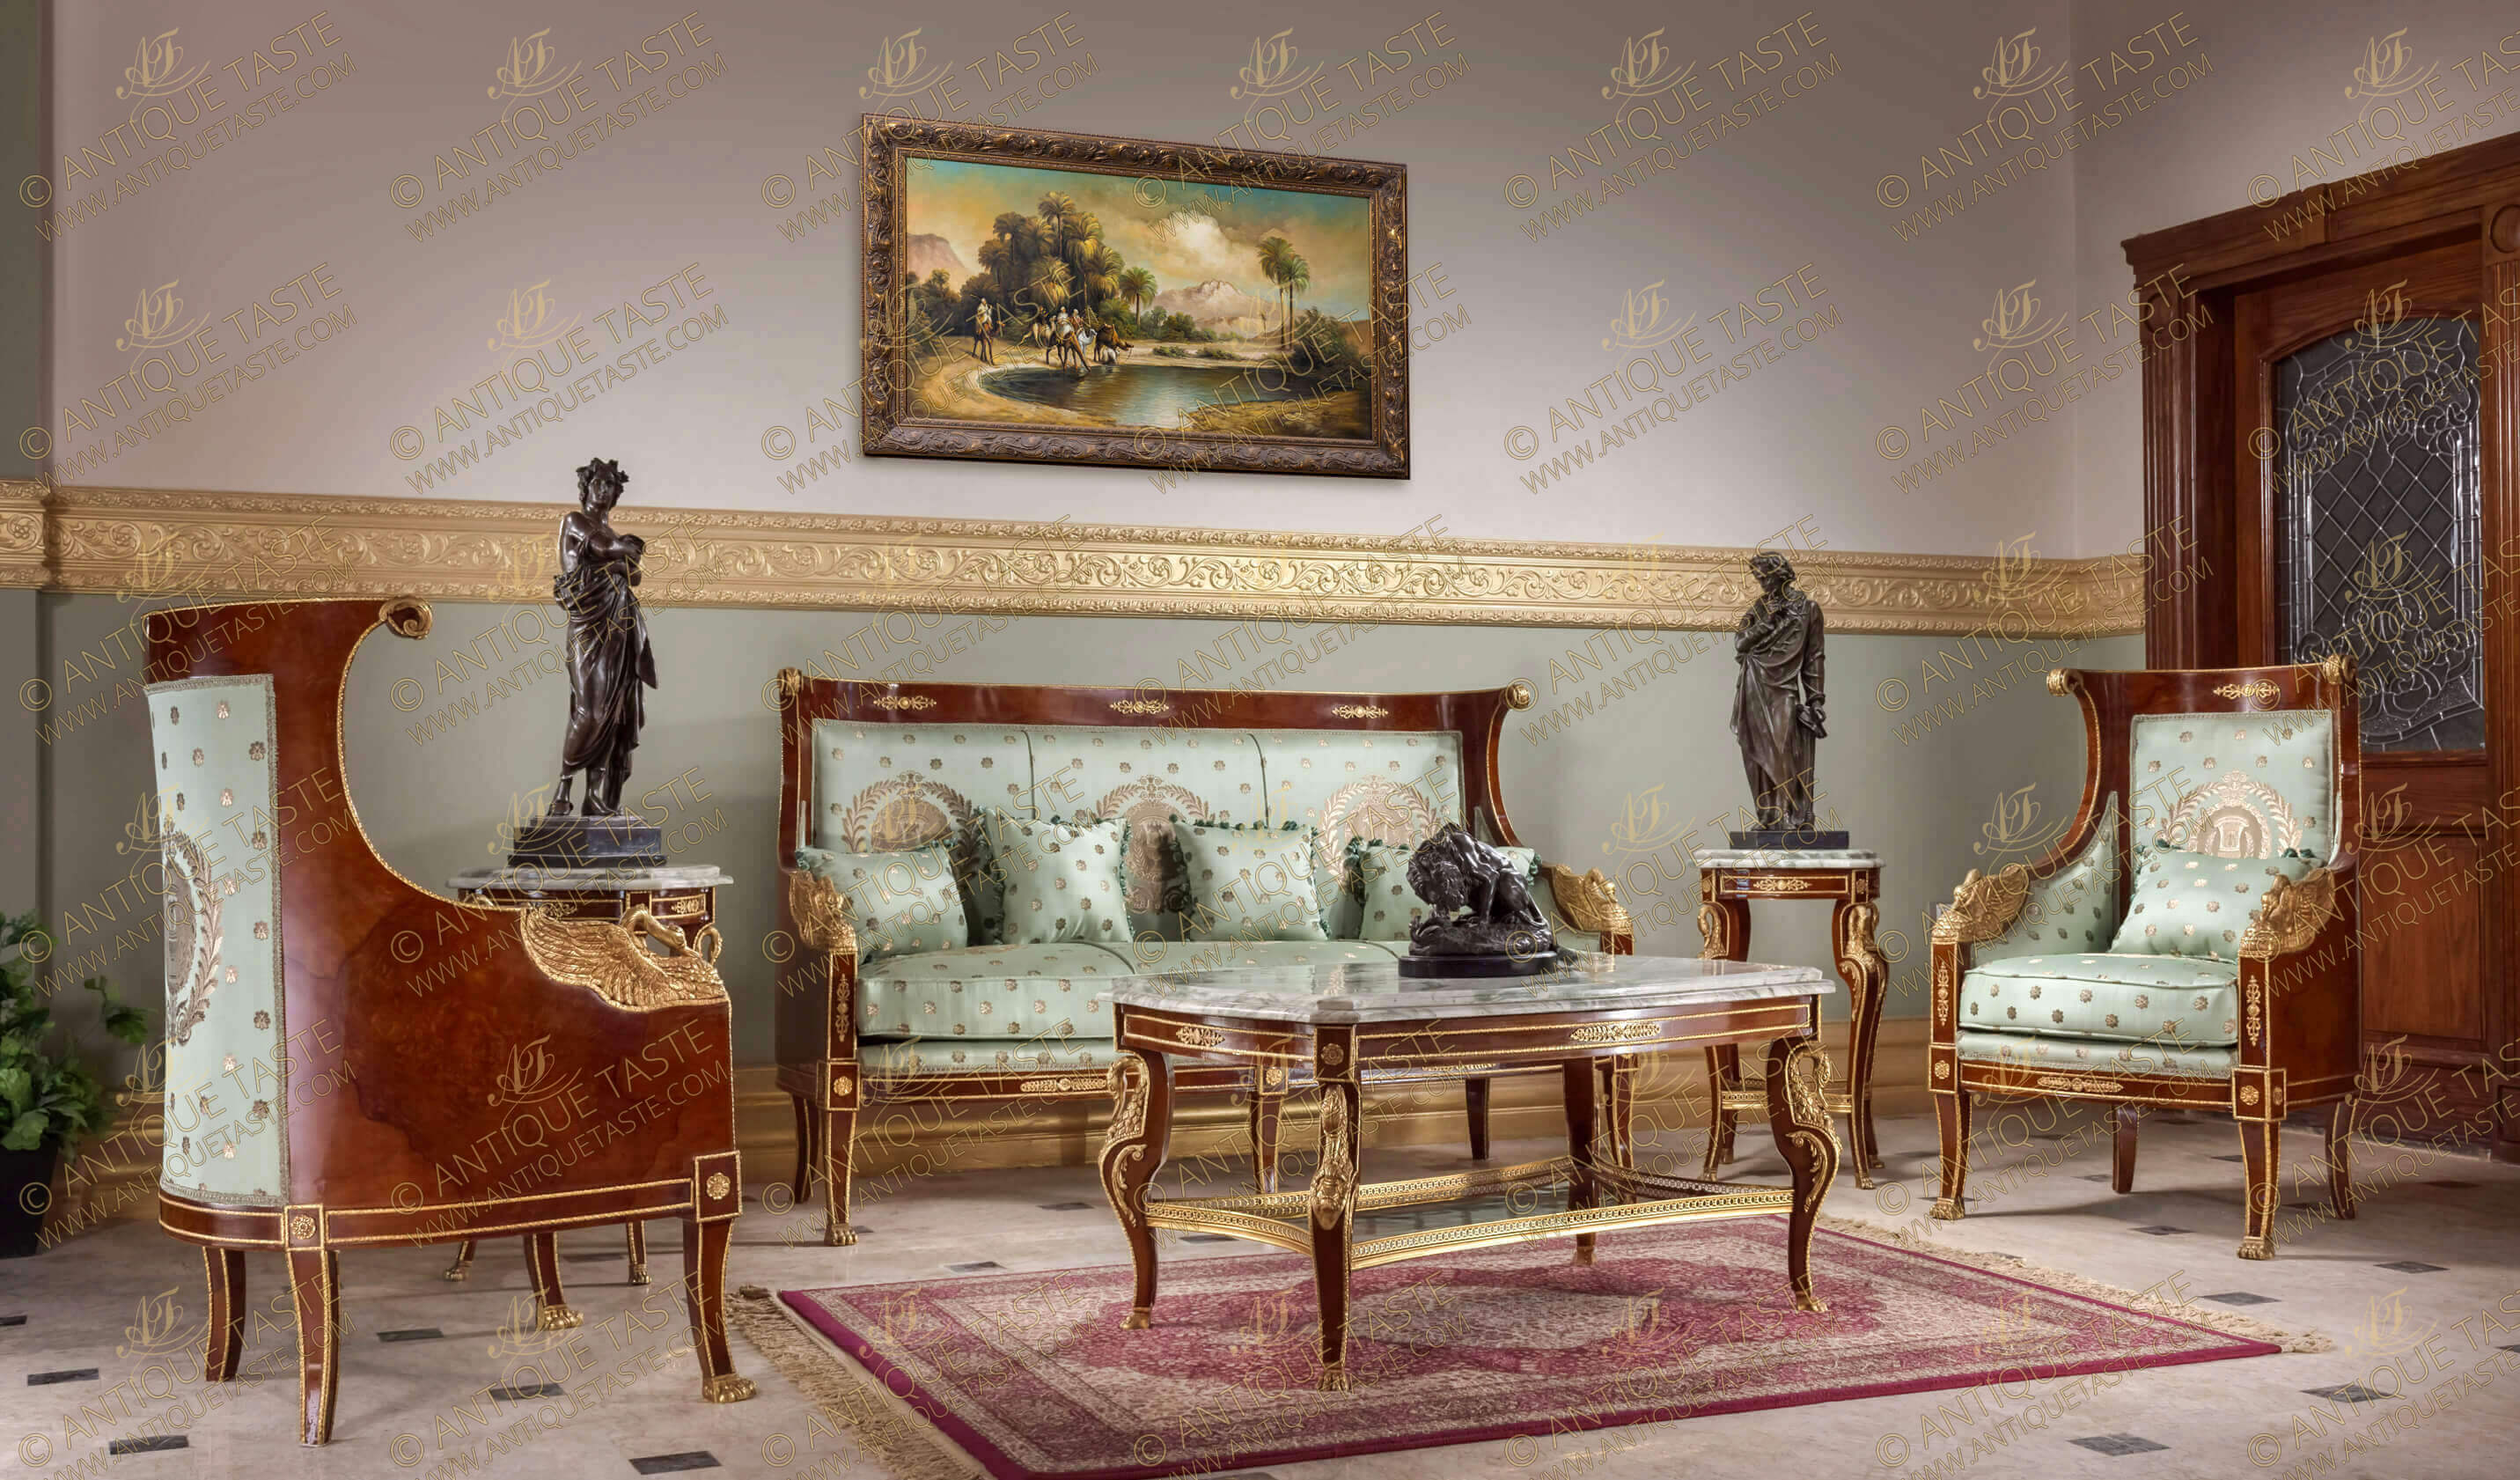 A spectacular and monumentally scaled French Napoleon Second Empire style gilt-ormolu-mounted veneer inlaid six pieces Salon Set adorned with finely chased ormolu mounts of swans, paw feet, flower rosettes, scrolling acanthus leaves and pierced ormolu works; upholstered in a Royal specially custom made damask fabric and consists of a sofa, two armchairs, two side tables and a fine central coffee table